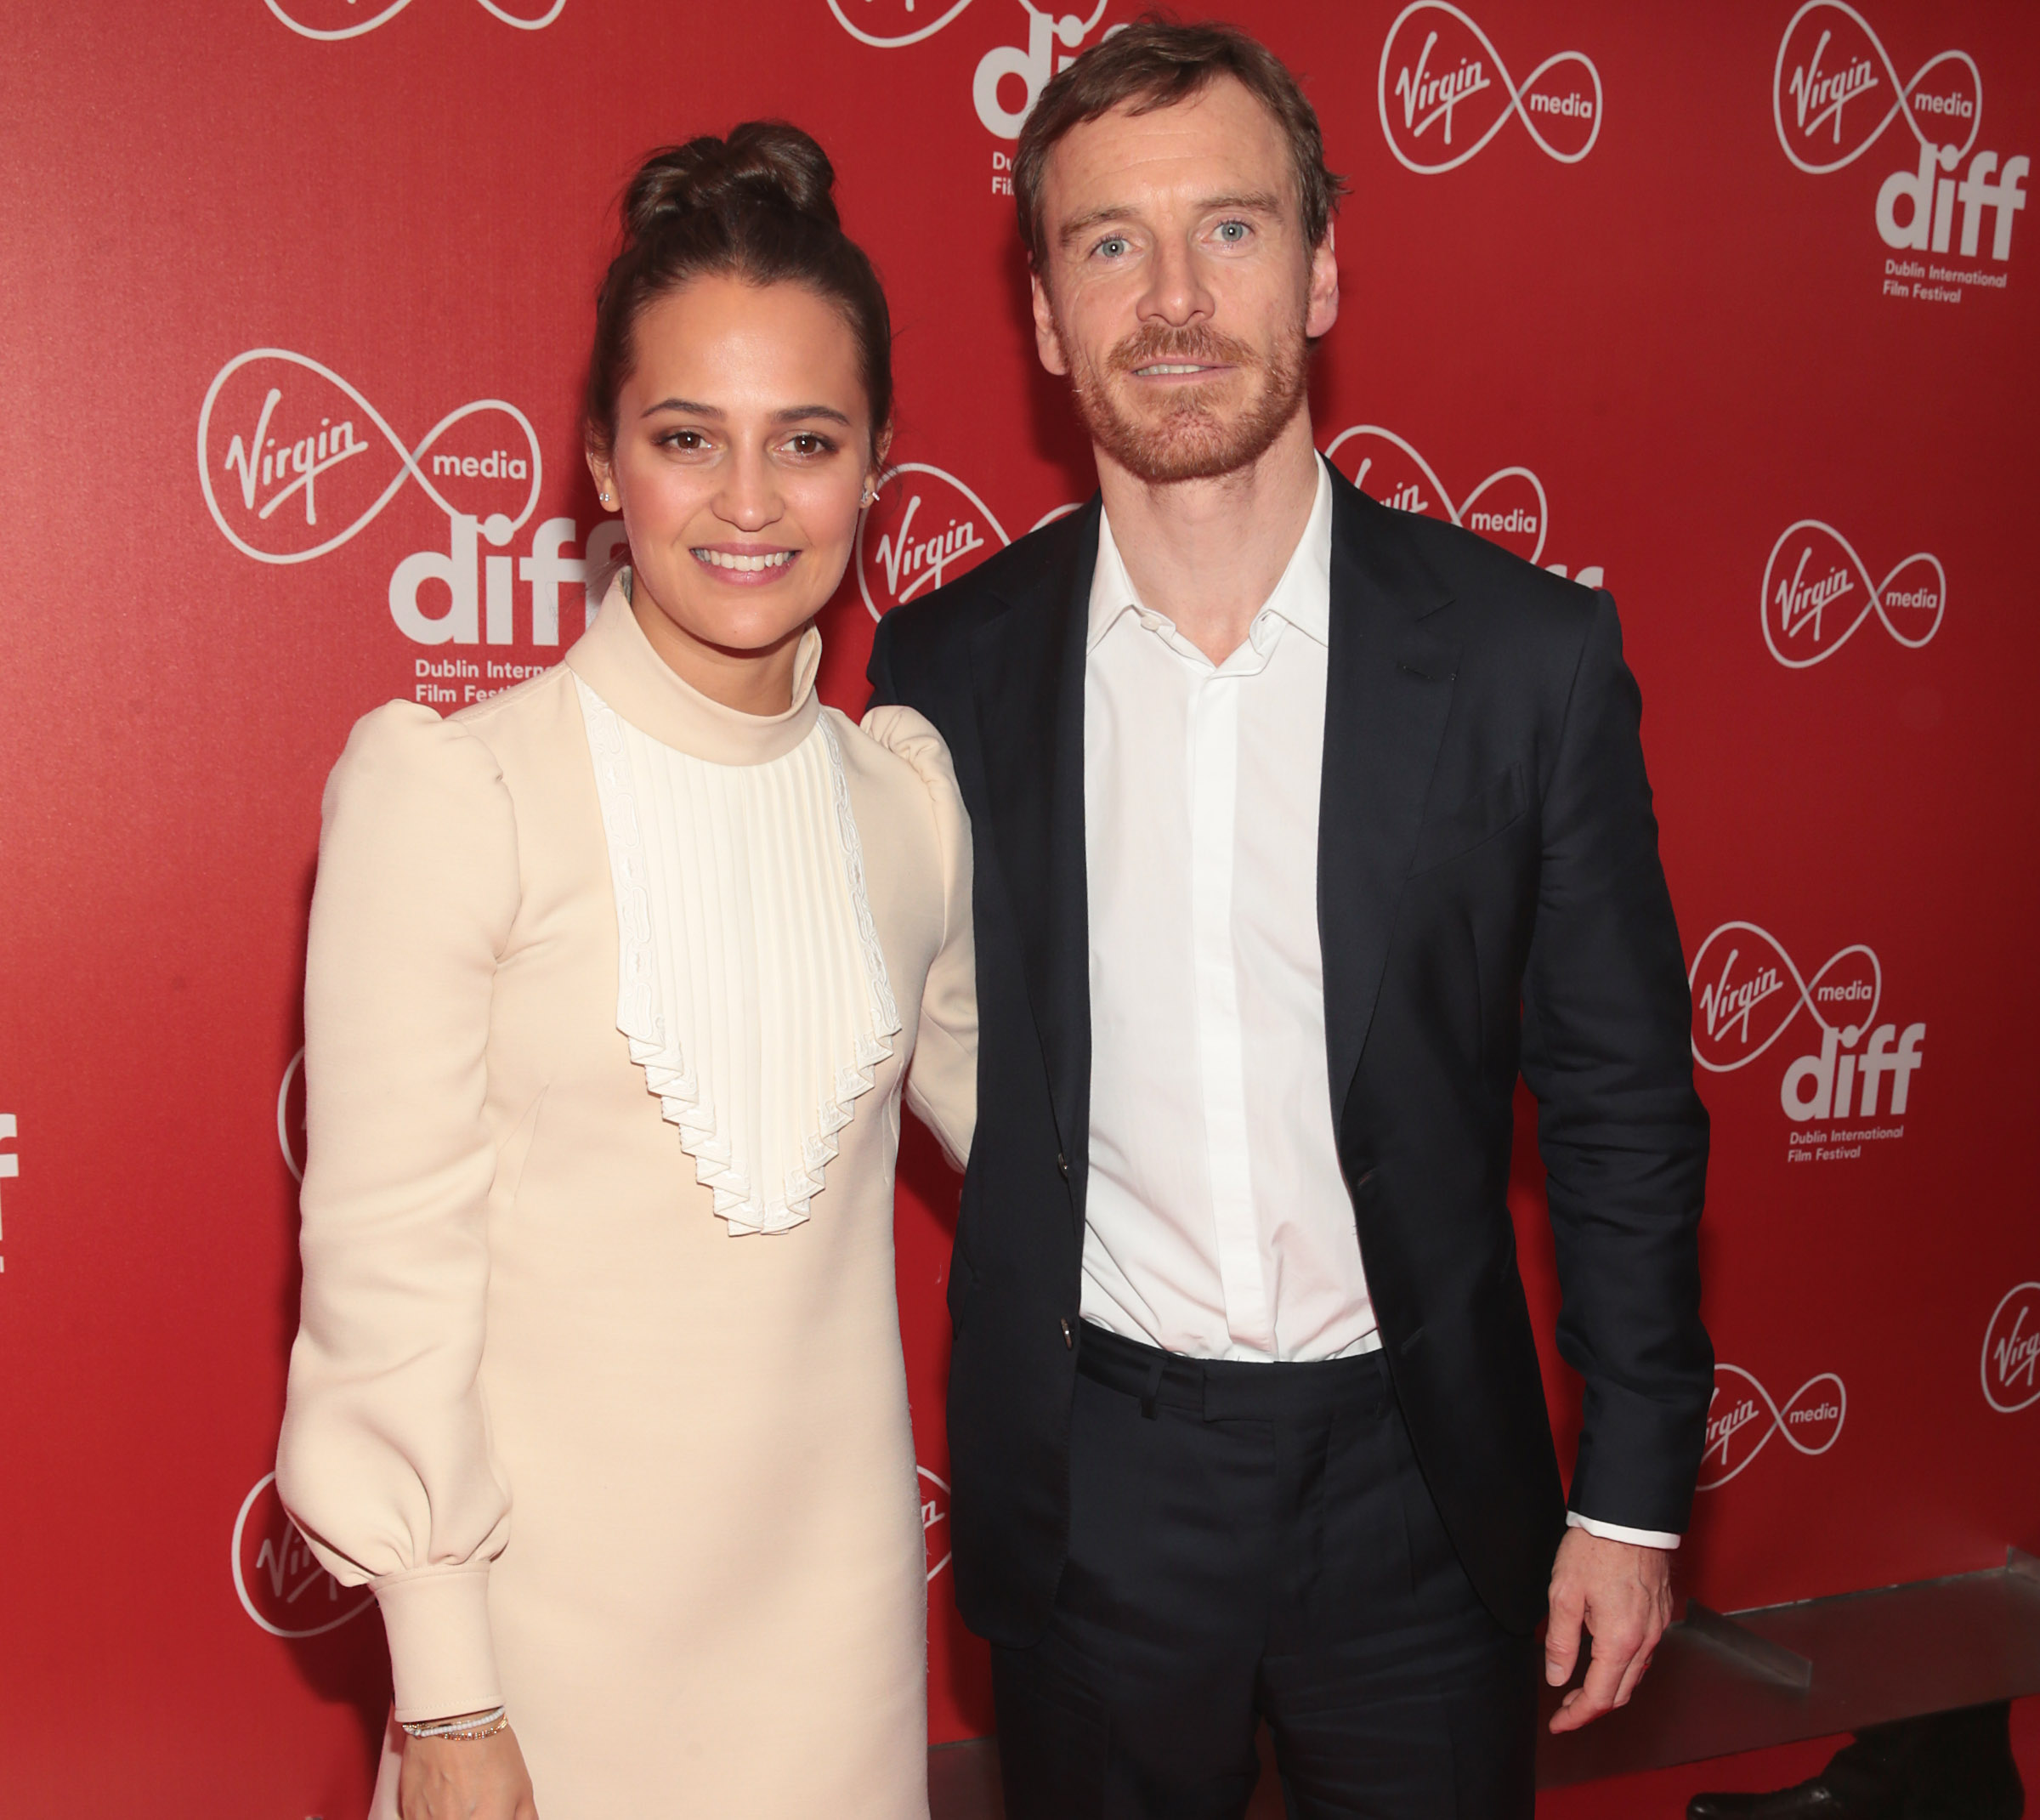 Alicia Vikander reveals she suffered a 'painful' miscarriage